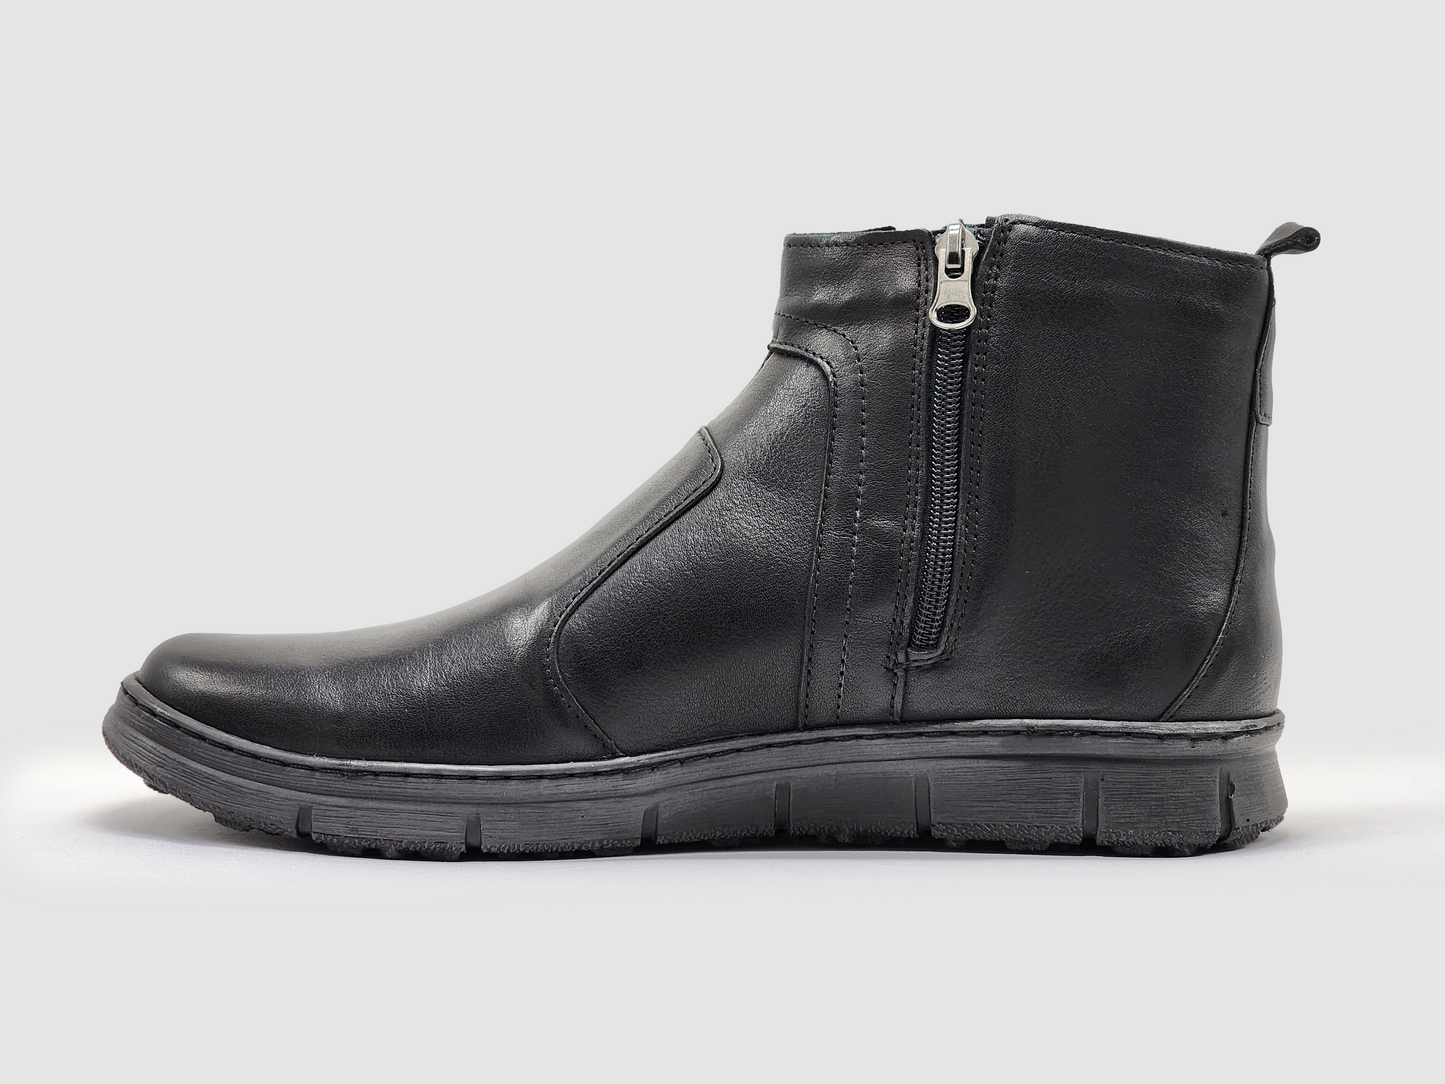 Men's Everyday Thin Wool-Lined Zip-Up Leather Boots - Kacper Global Shoes 